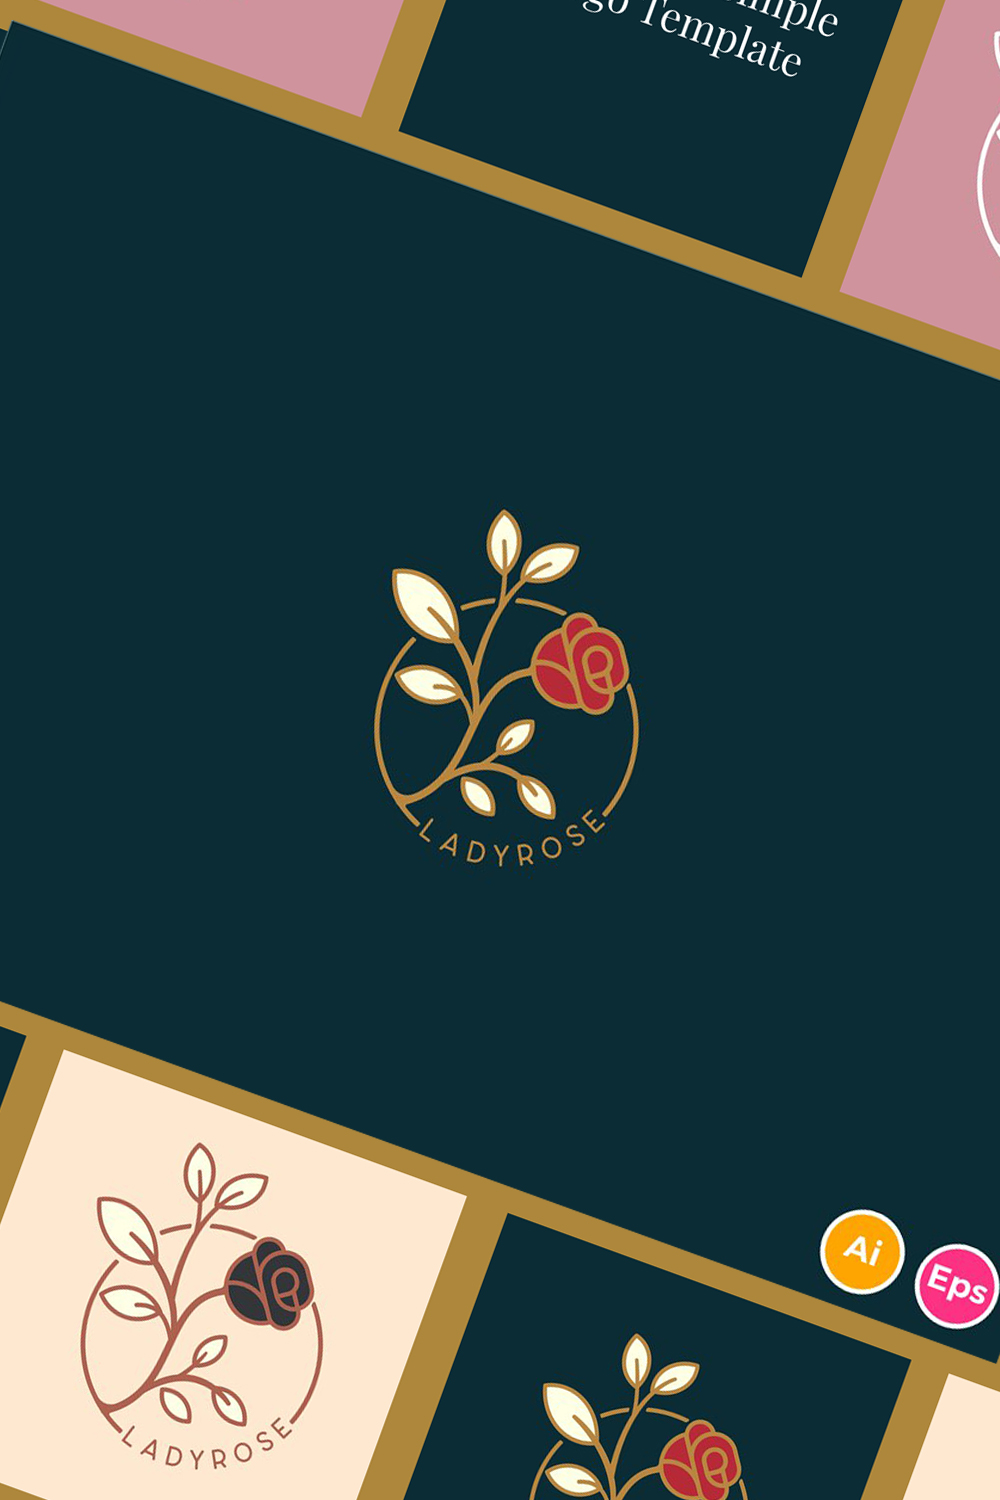 Lady rose simple logo template of pinterest.